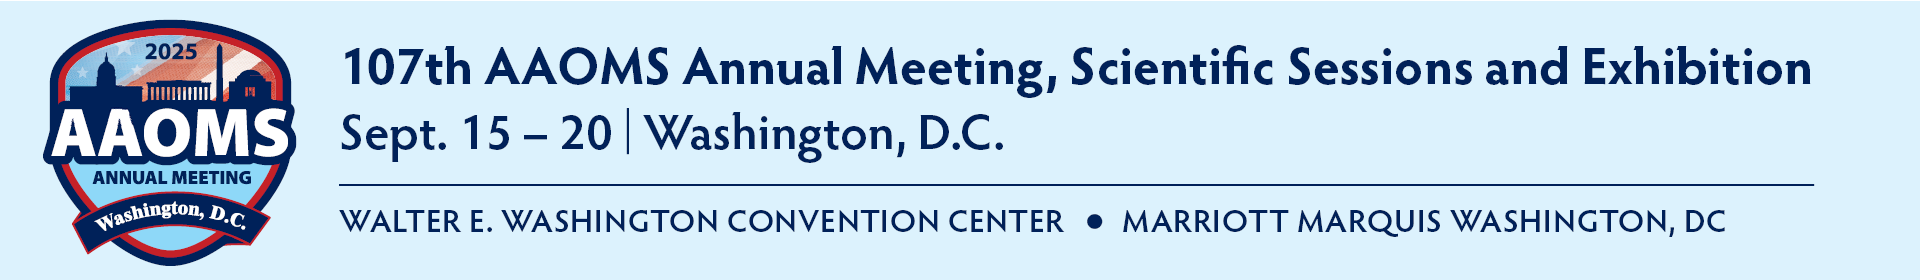 2025 AAOMS 107th Annual Meeting Event Banner